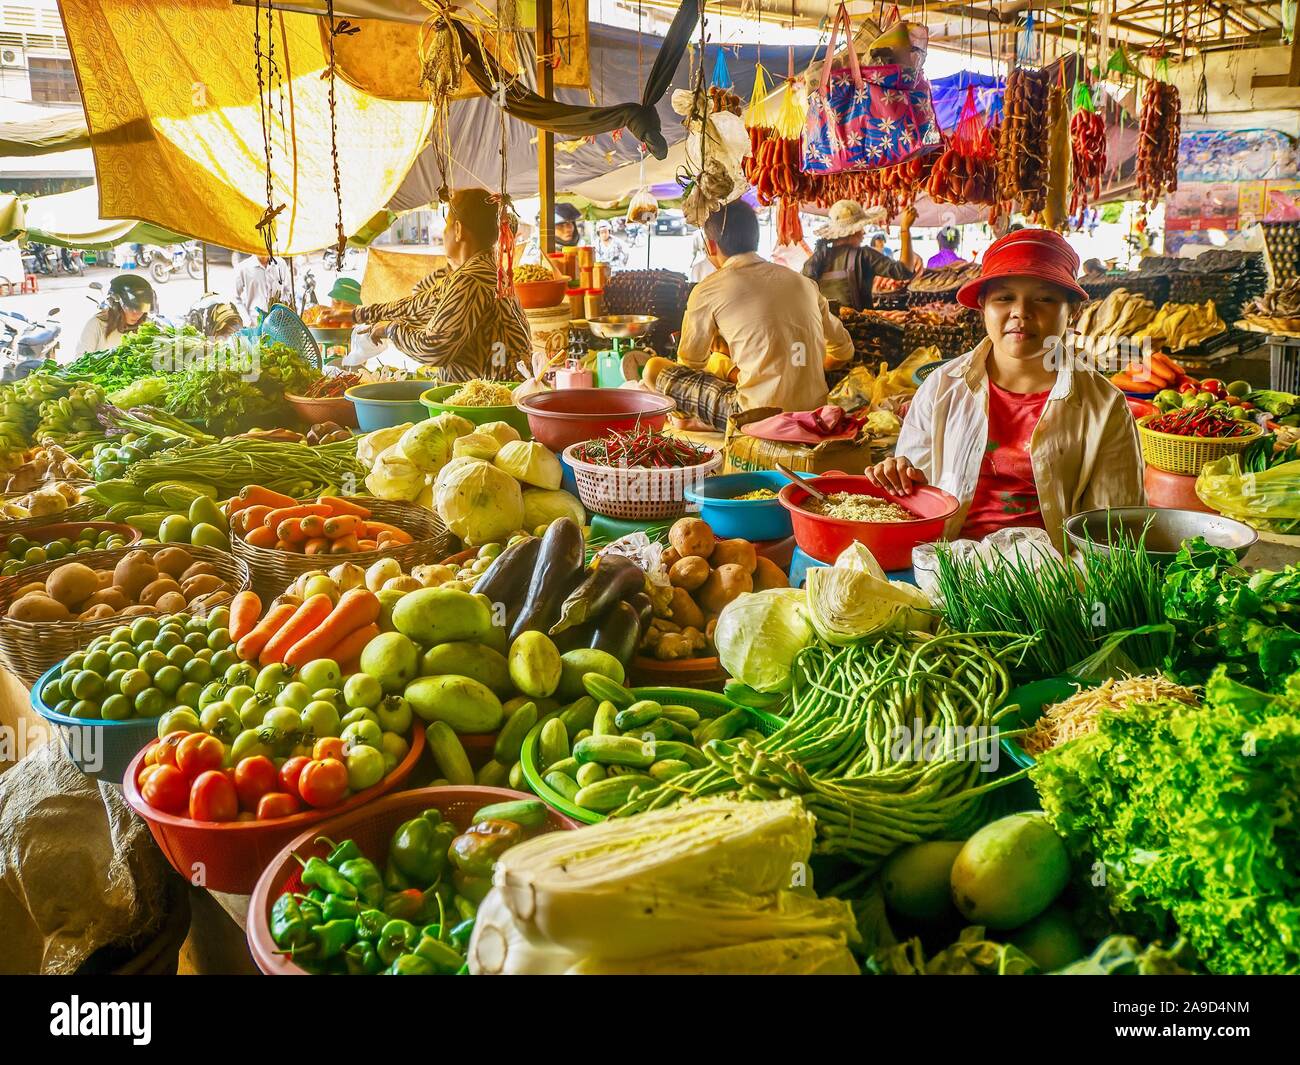 Showing a variety of fresh produce for sale at a local indoor public market, typical of southeast Asia. Stock Photo